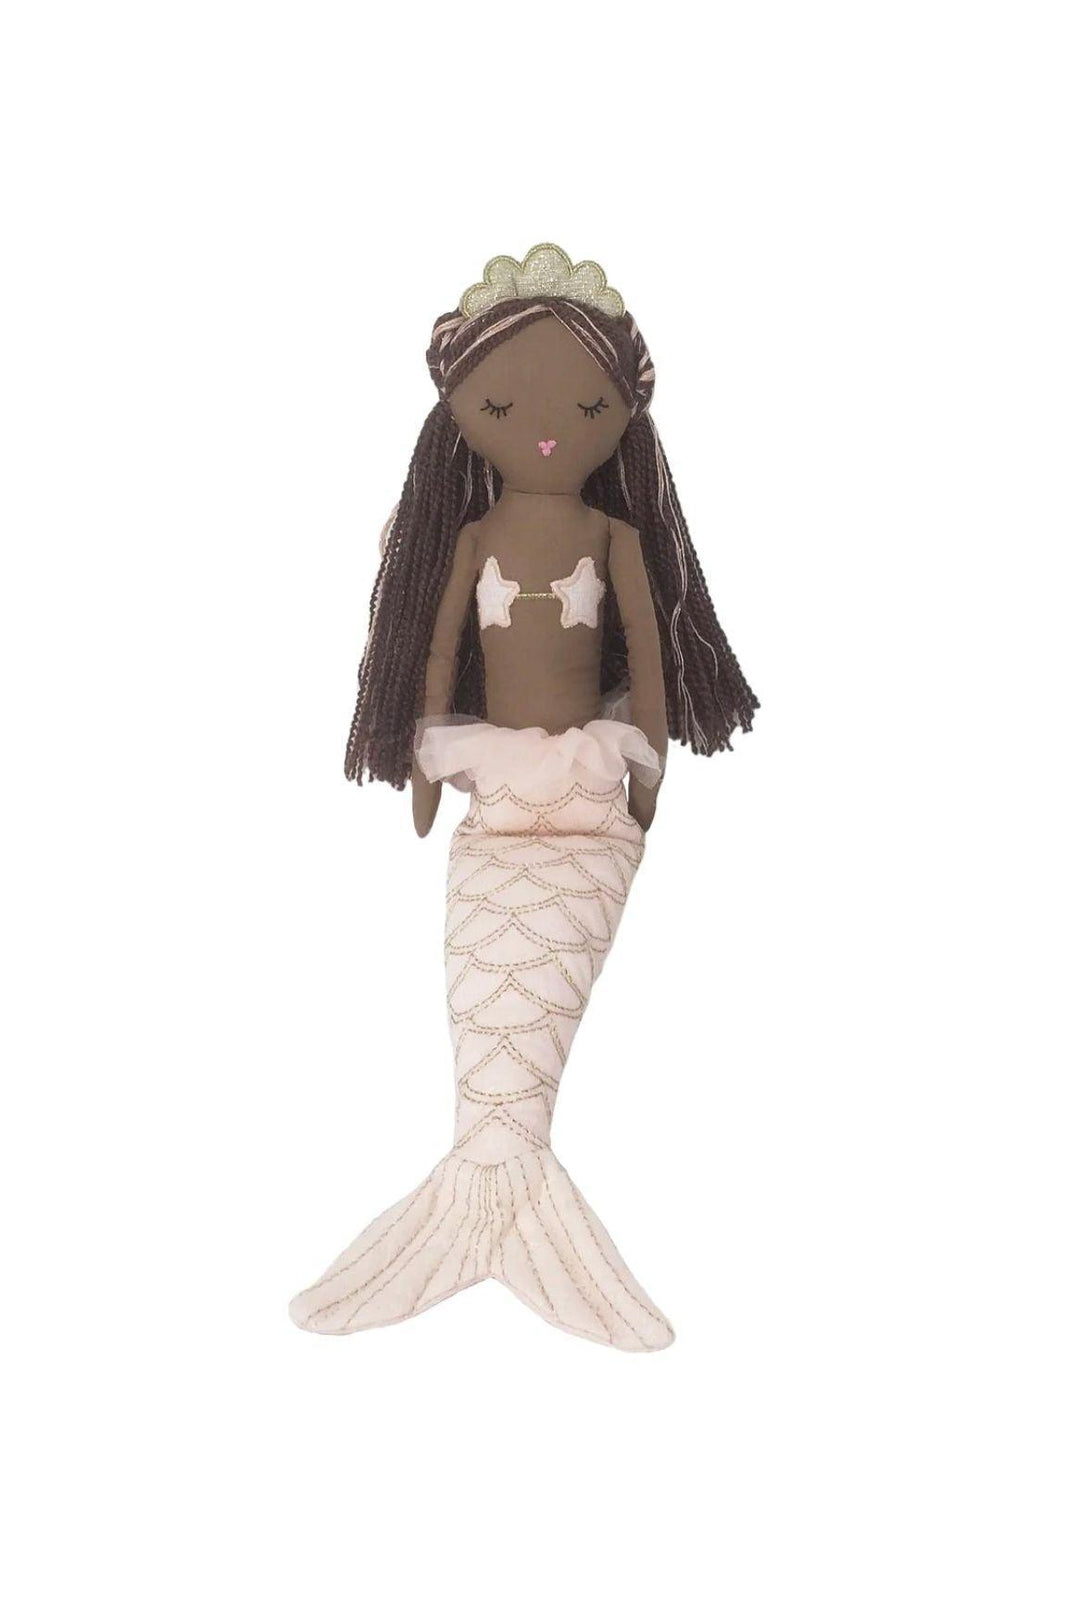 15-inch-macie-the-mermaid-doll-shimmery-scales-and-yarn-hair-sophia-rose-children-s-boutique-1 - Sophia Rose Children's Boutique